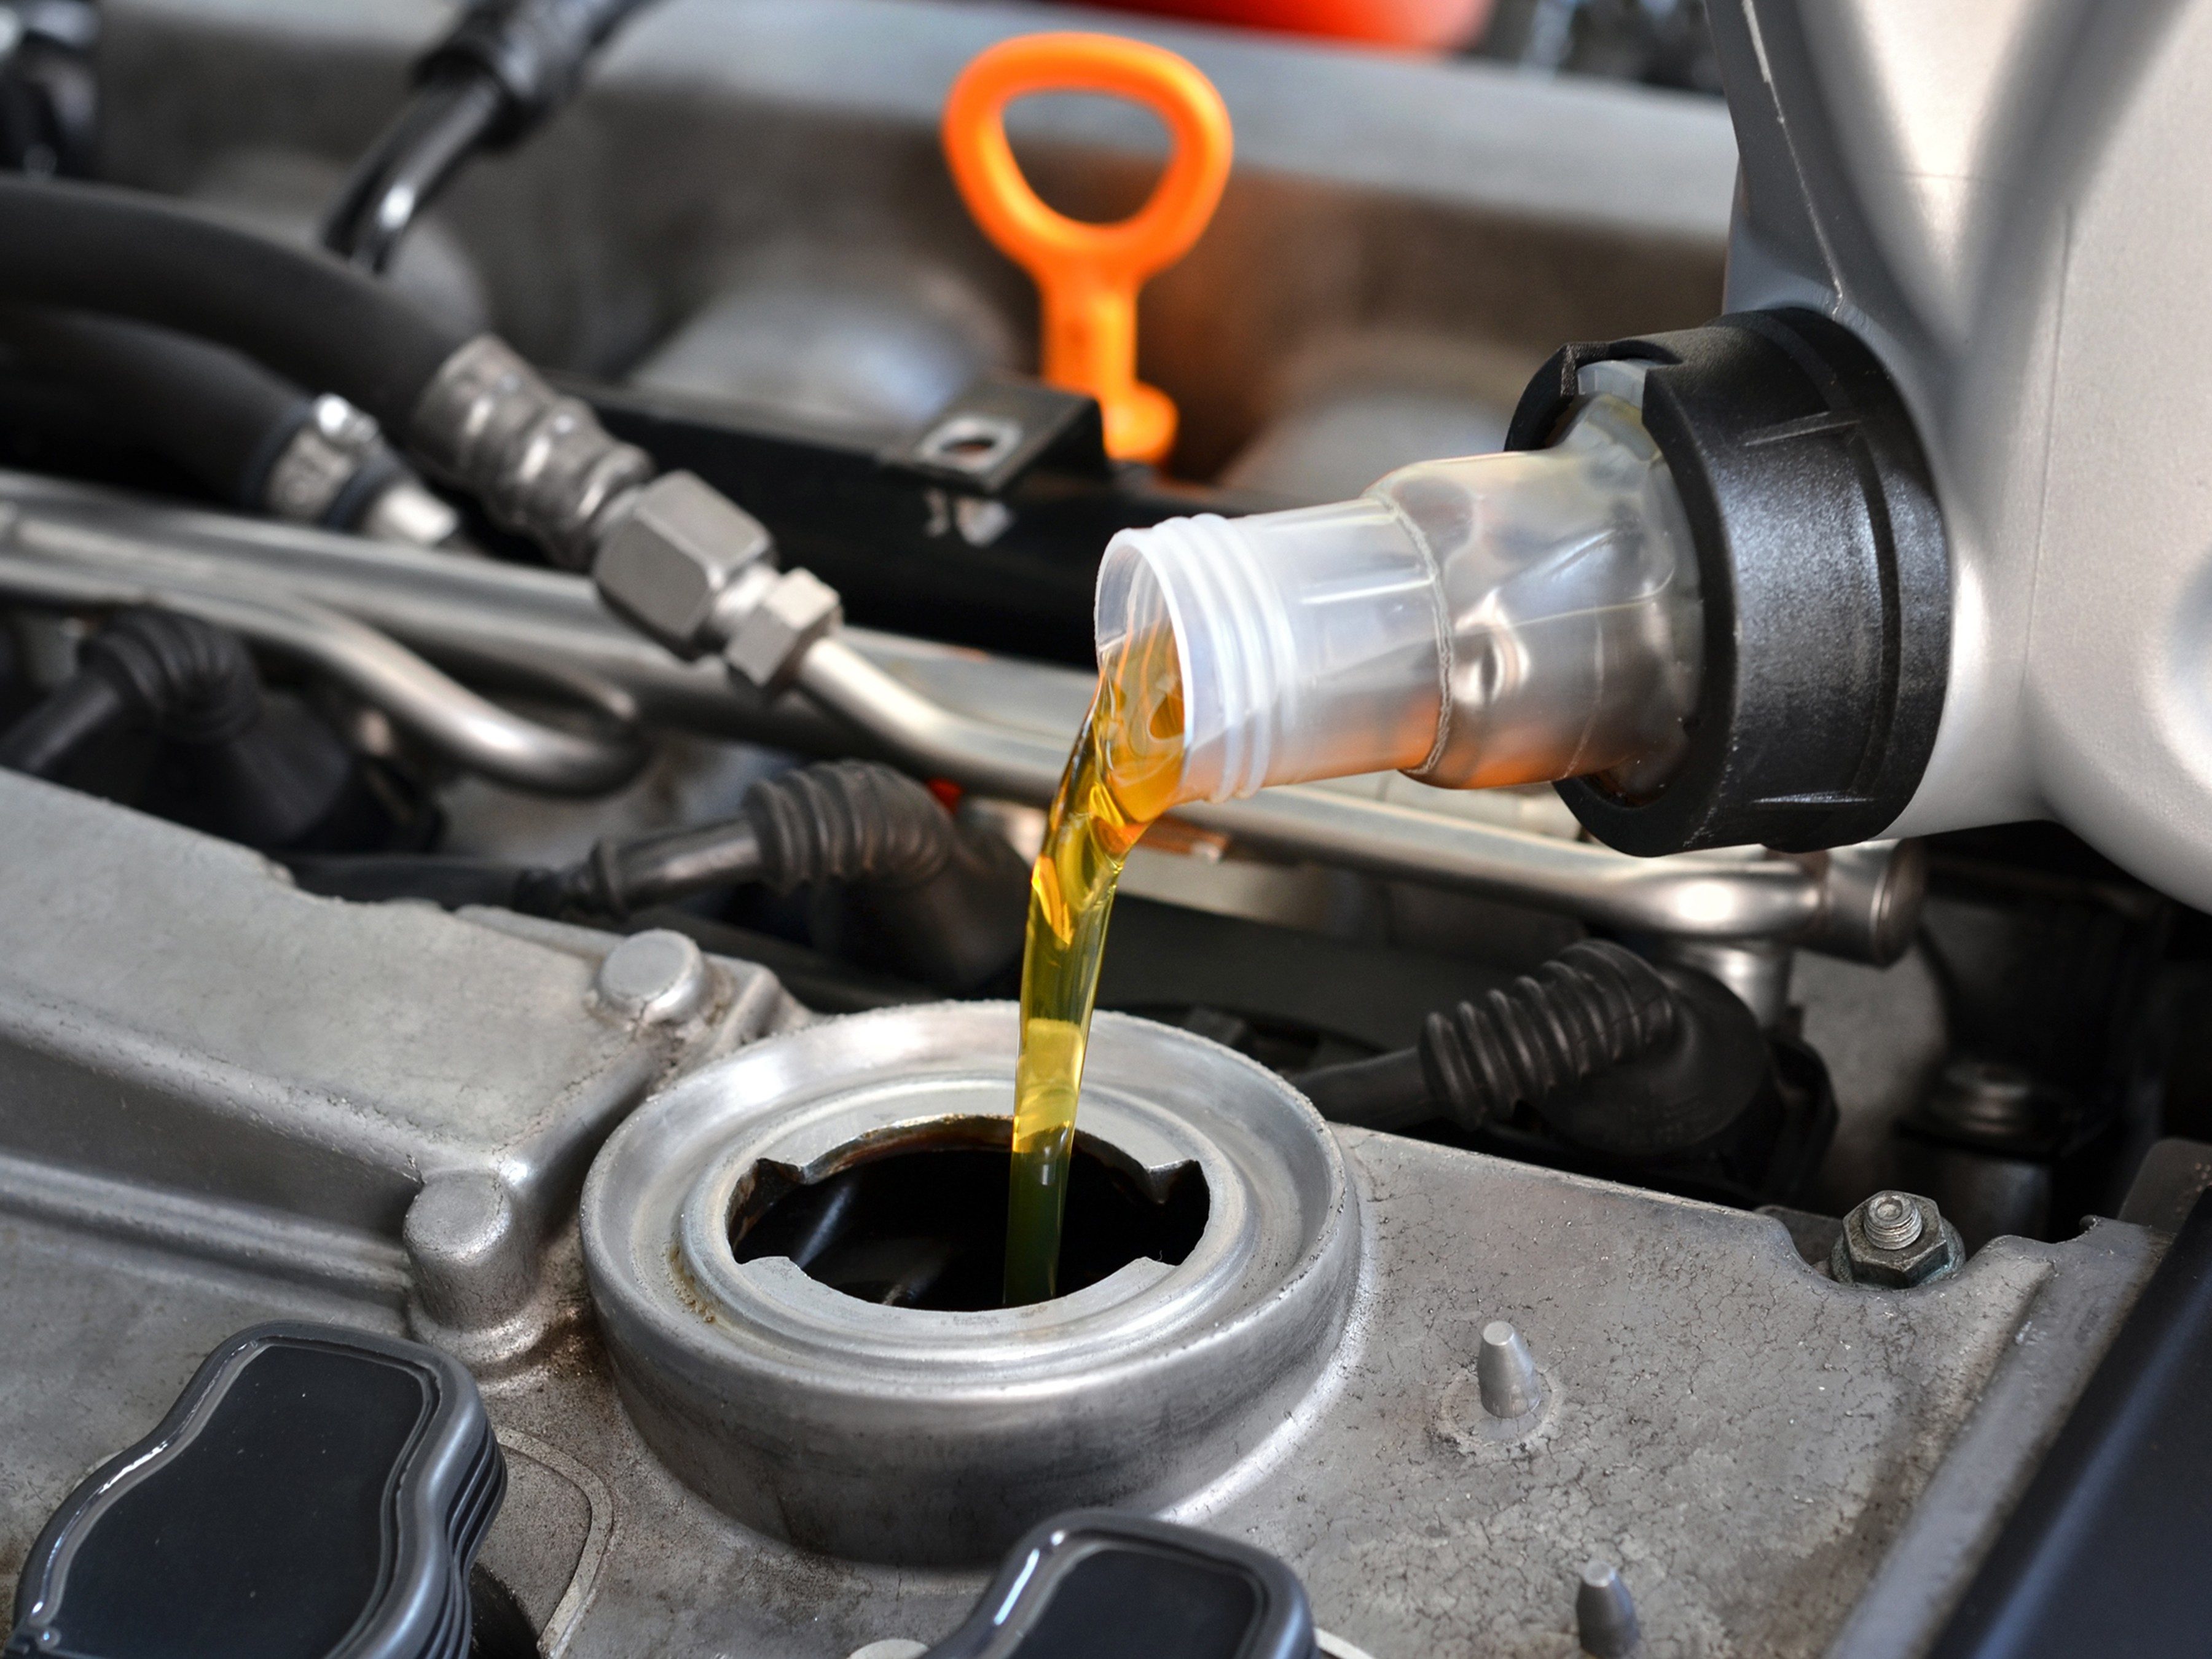 1. Change the car engine oil consistently.